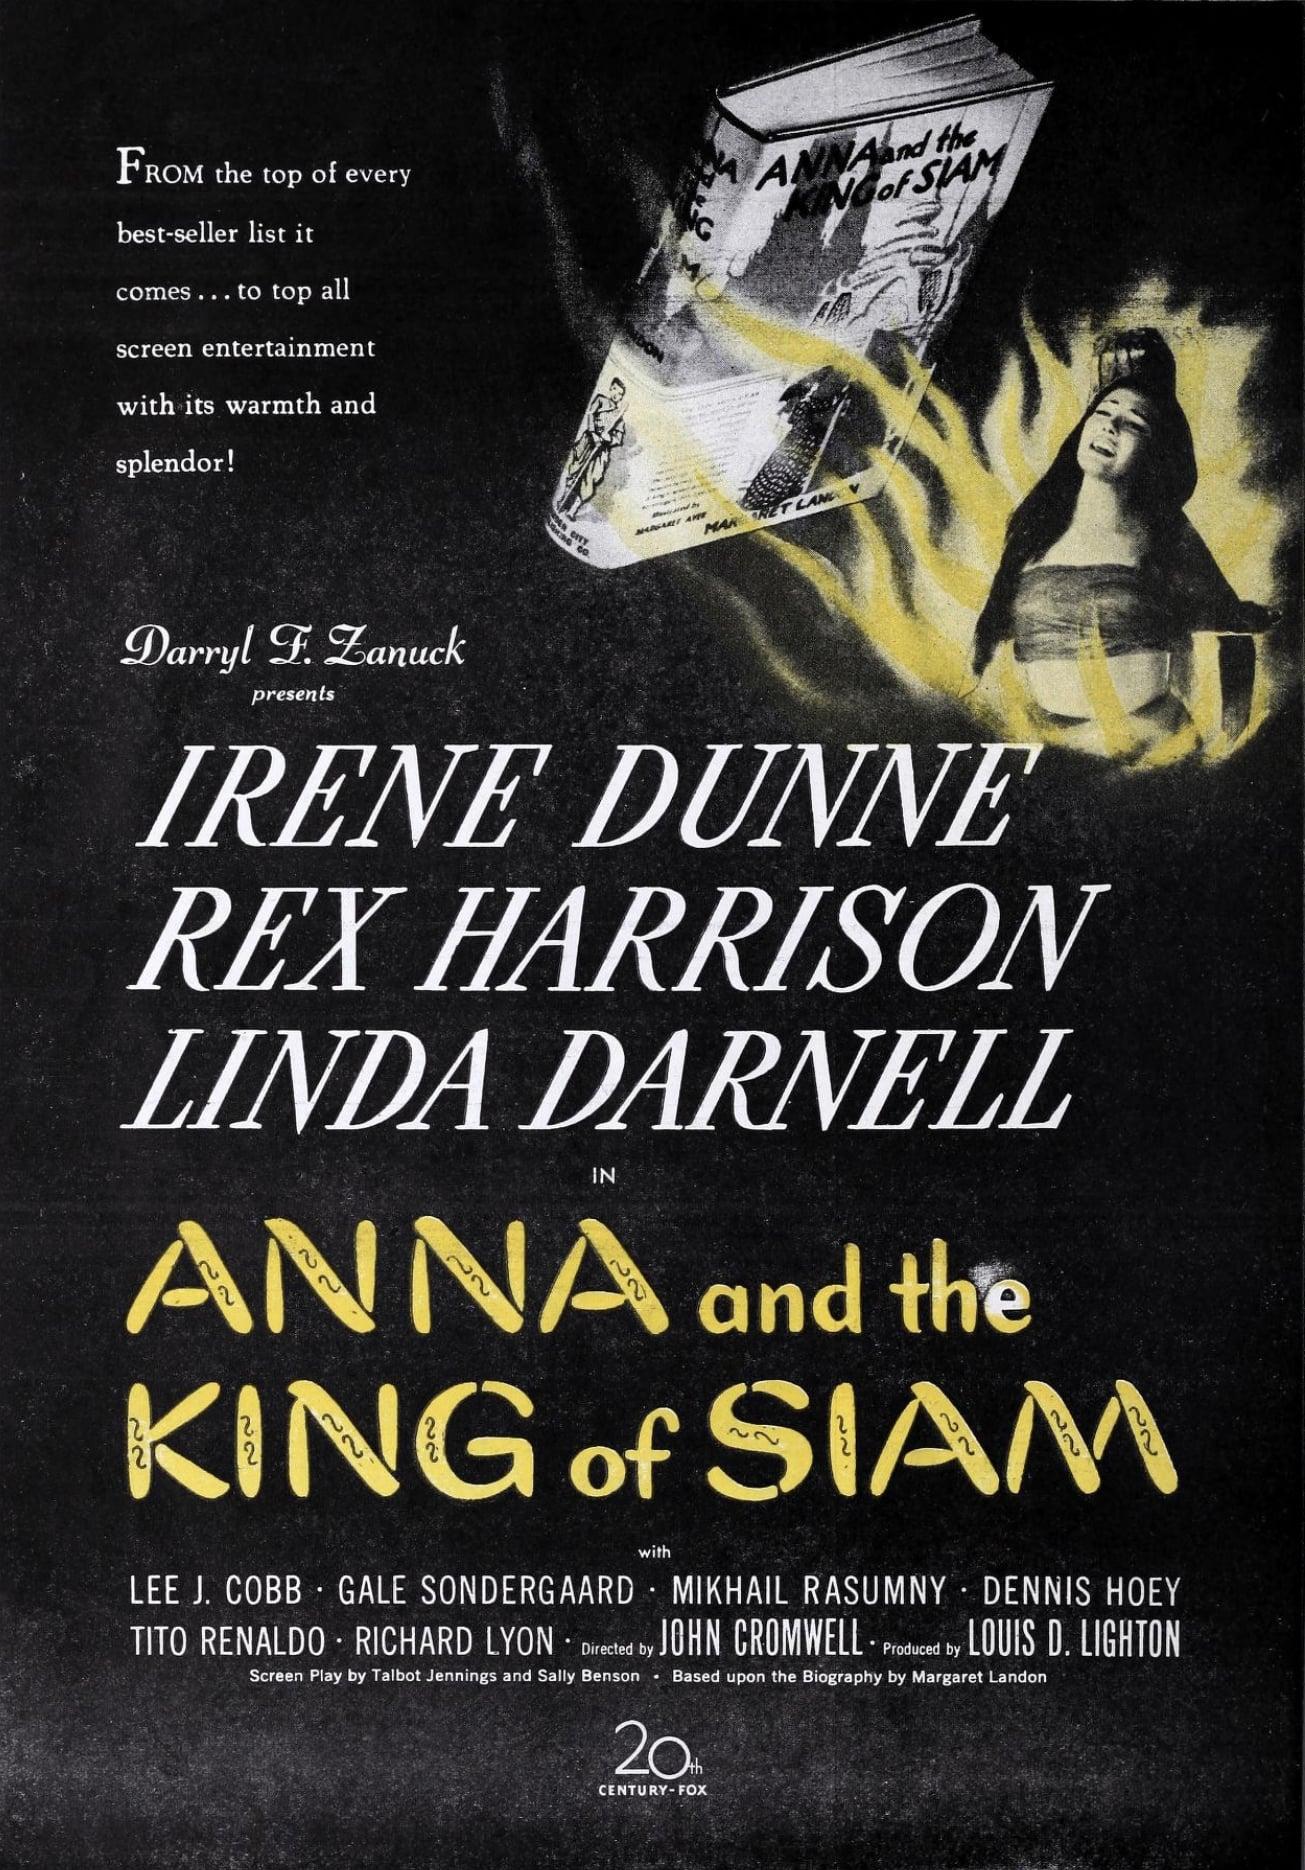 Anna and the King of Siam poster